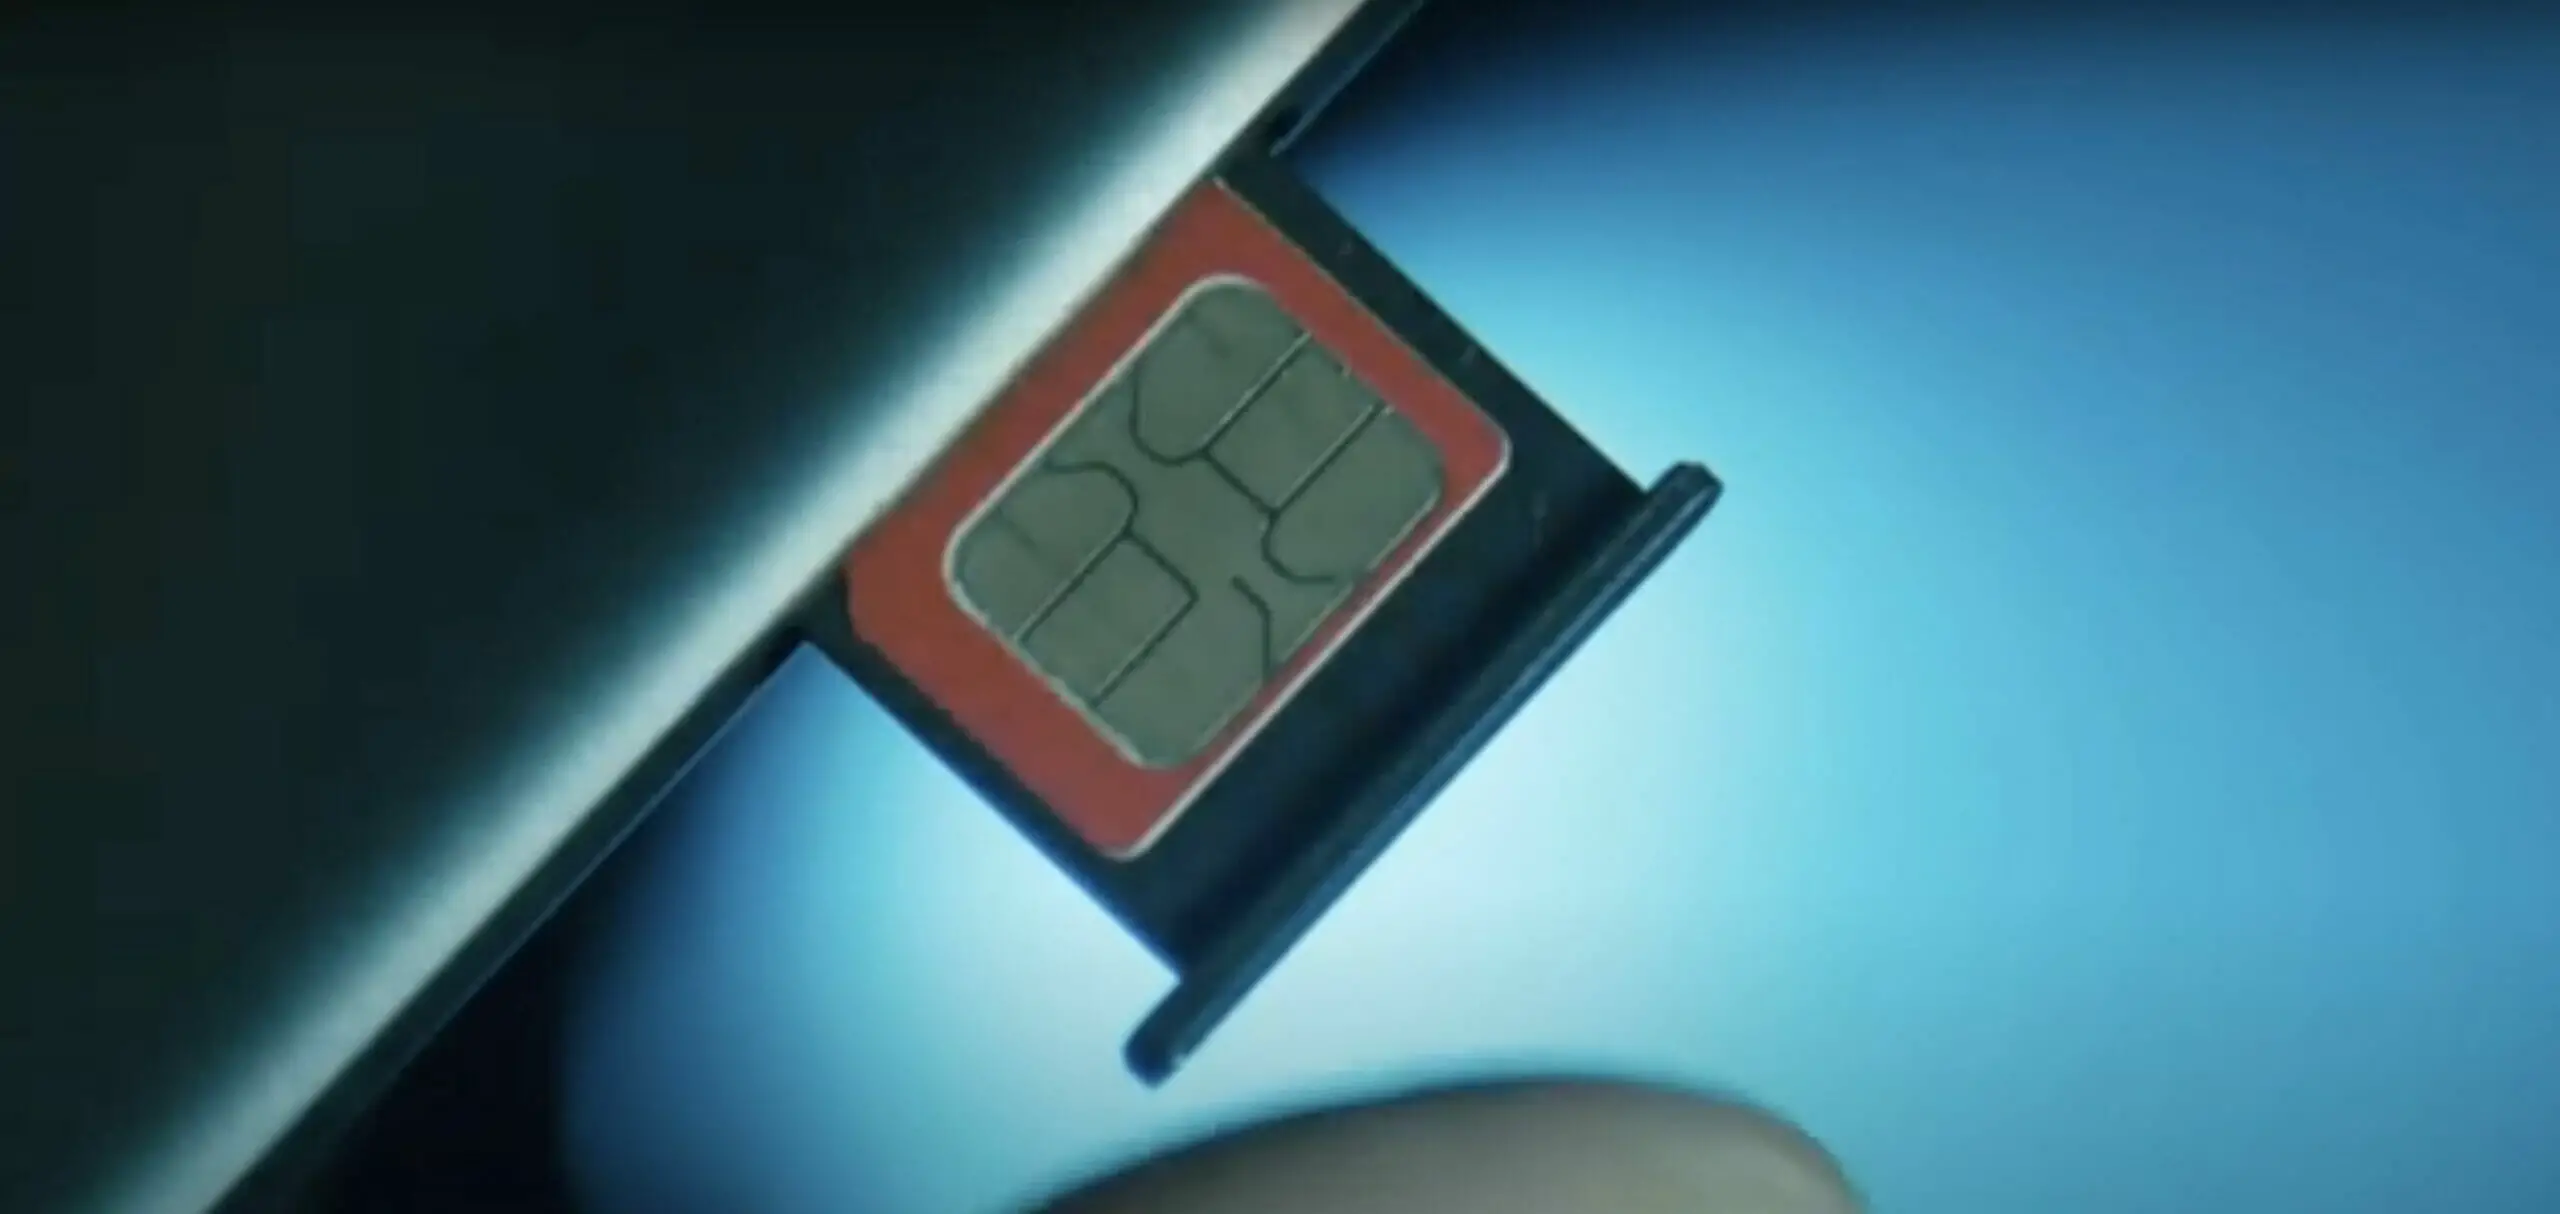 sim card about to be inserted on the phone's sim card slot